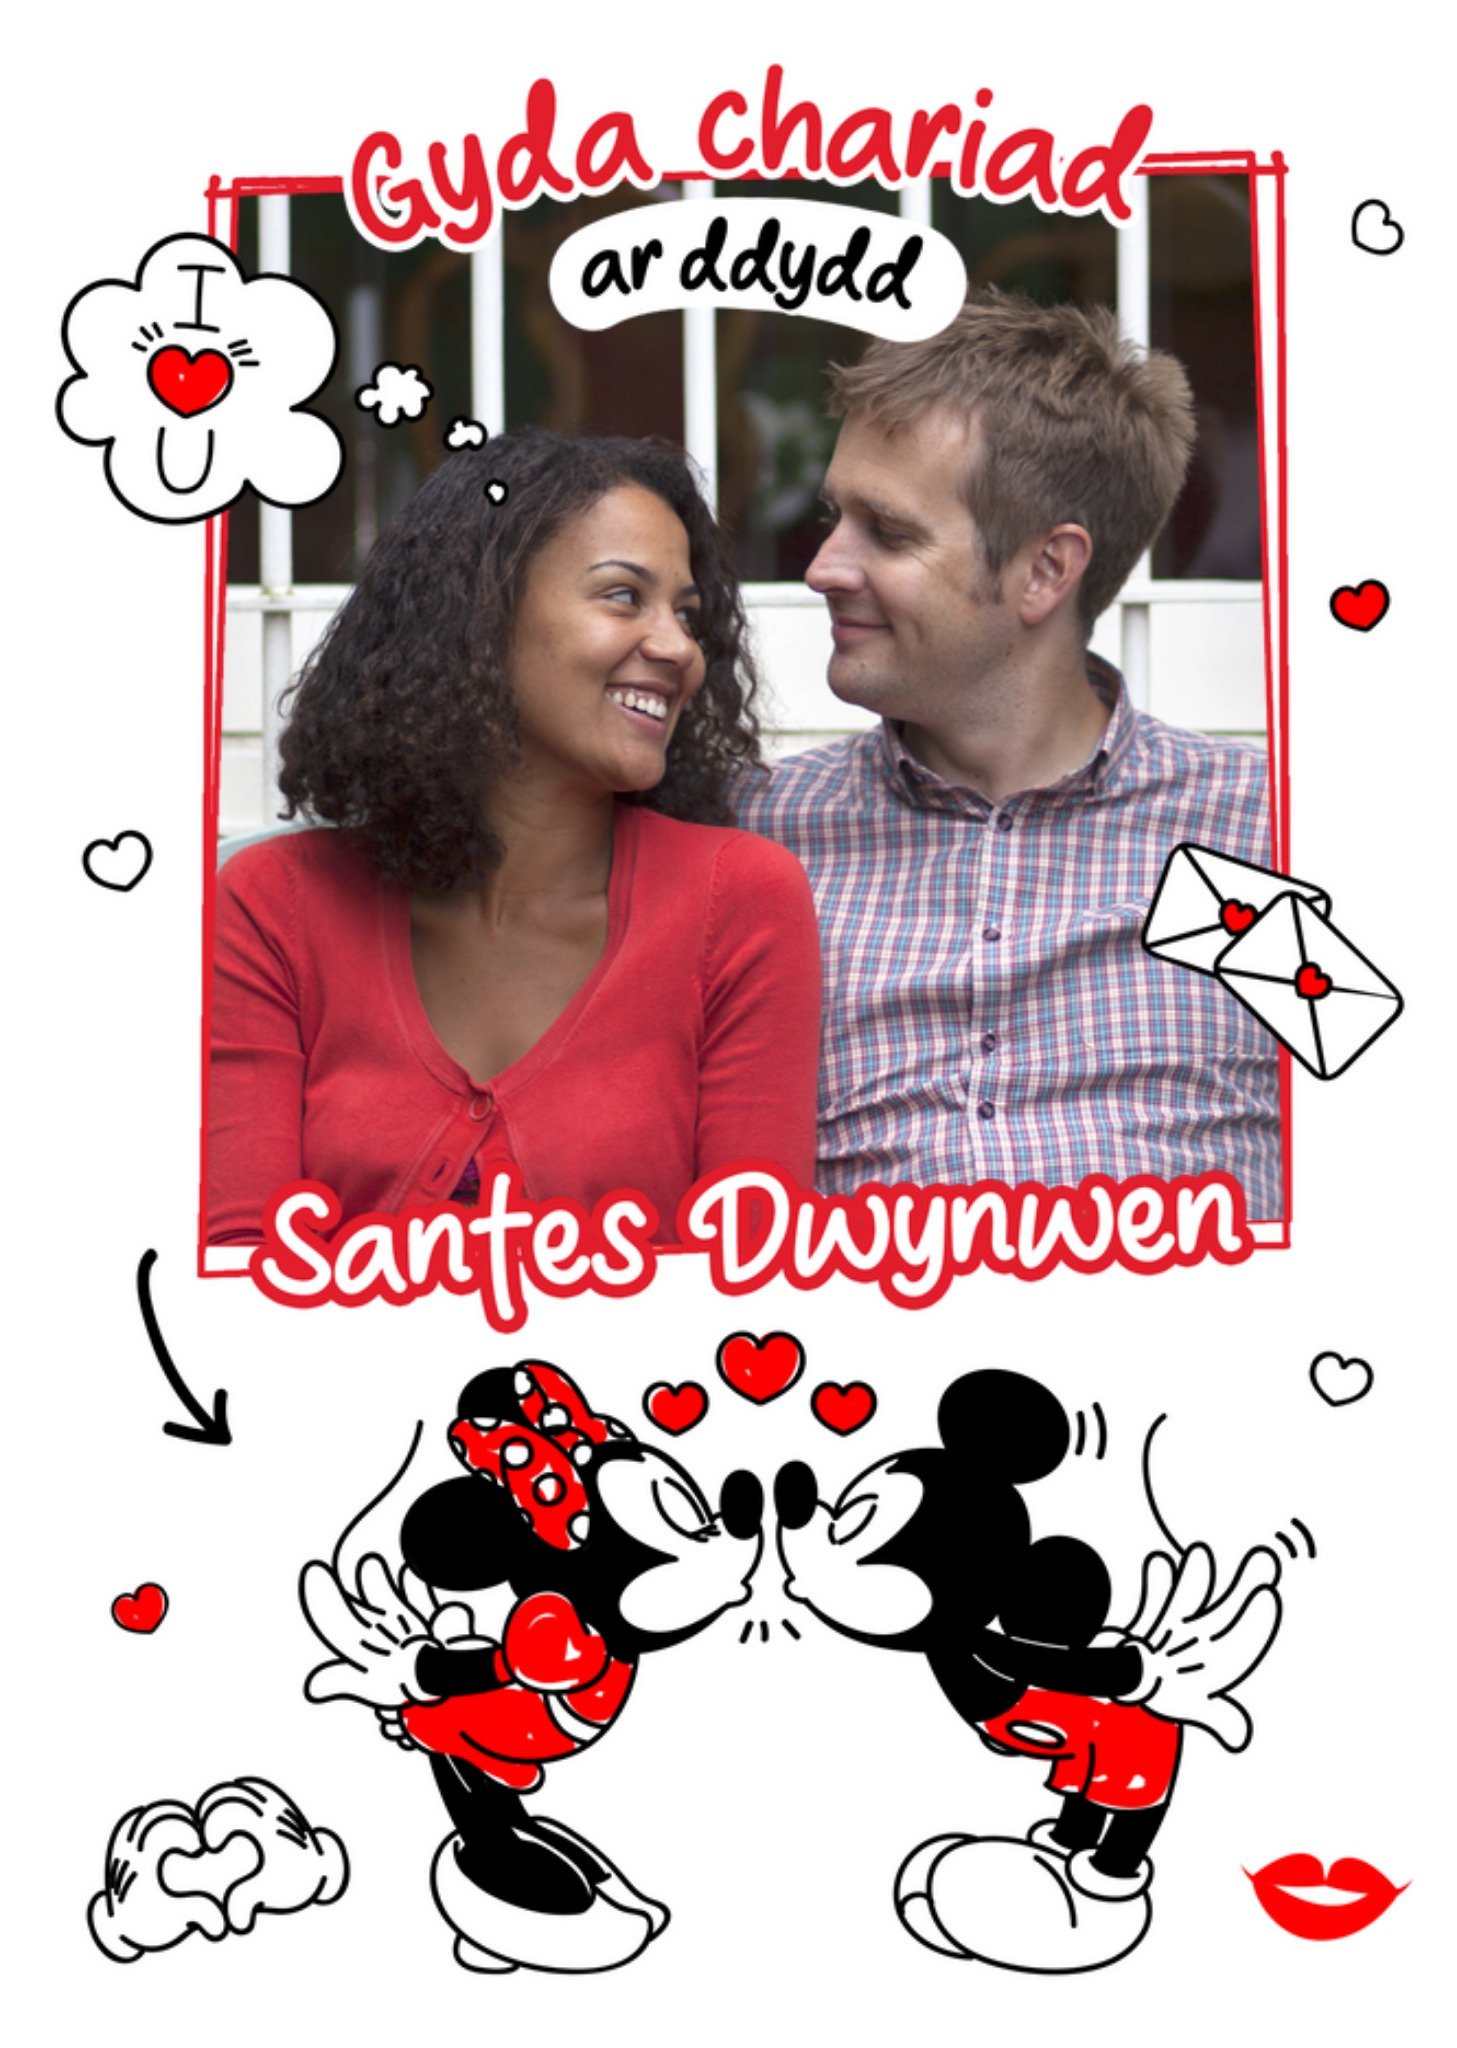 Mickey Mouse Disney Mickey And Minnie Mouse Kiss Photo Upload Welsh St Dwynwen's Day Card Ecard